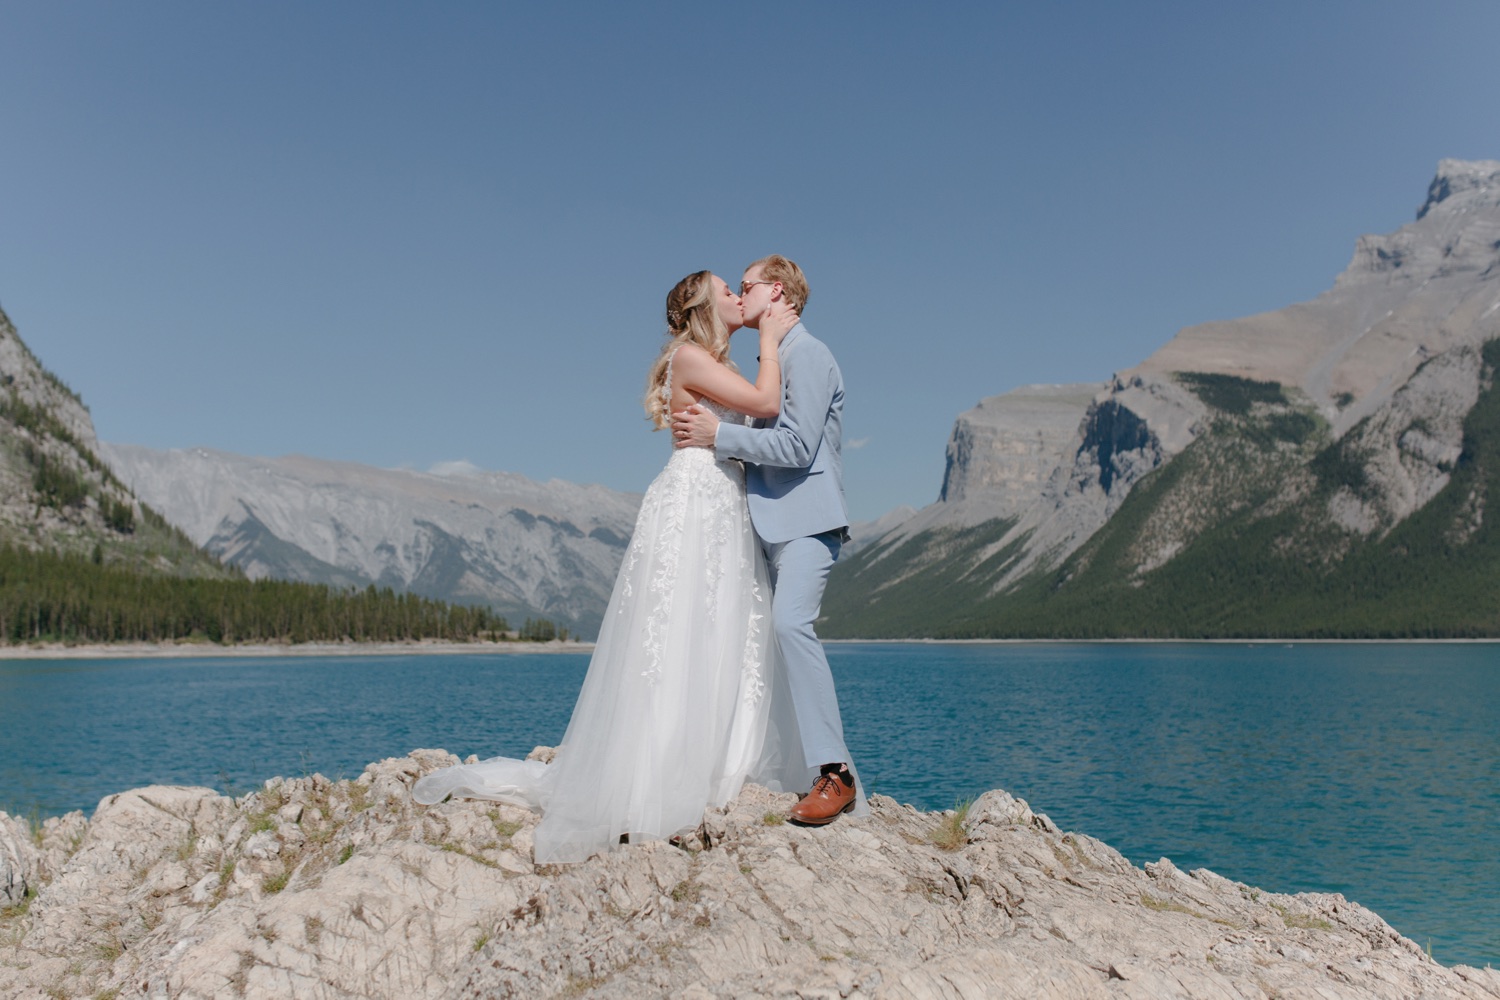 Groom in dusty blue suit and bride wearing fine detailed wedding dress kissing during midday portraits at Lake Minnewanka